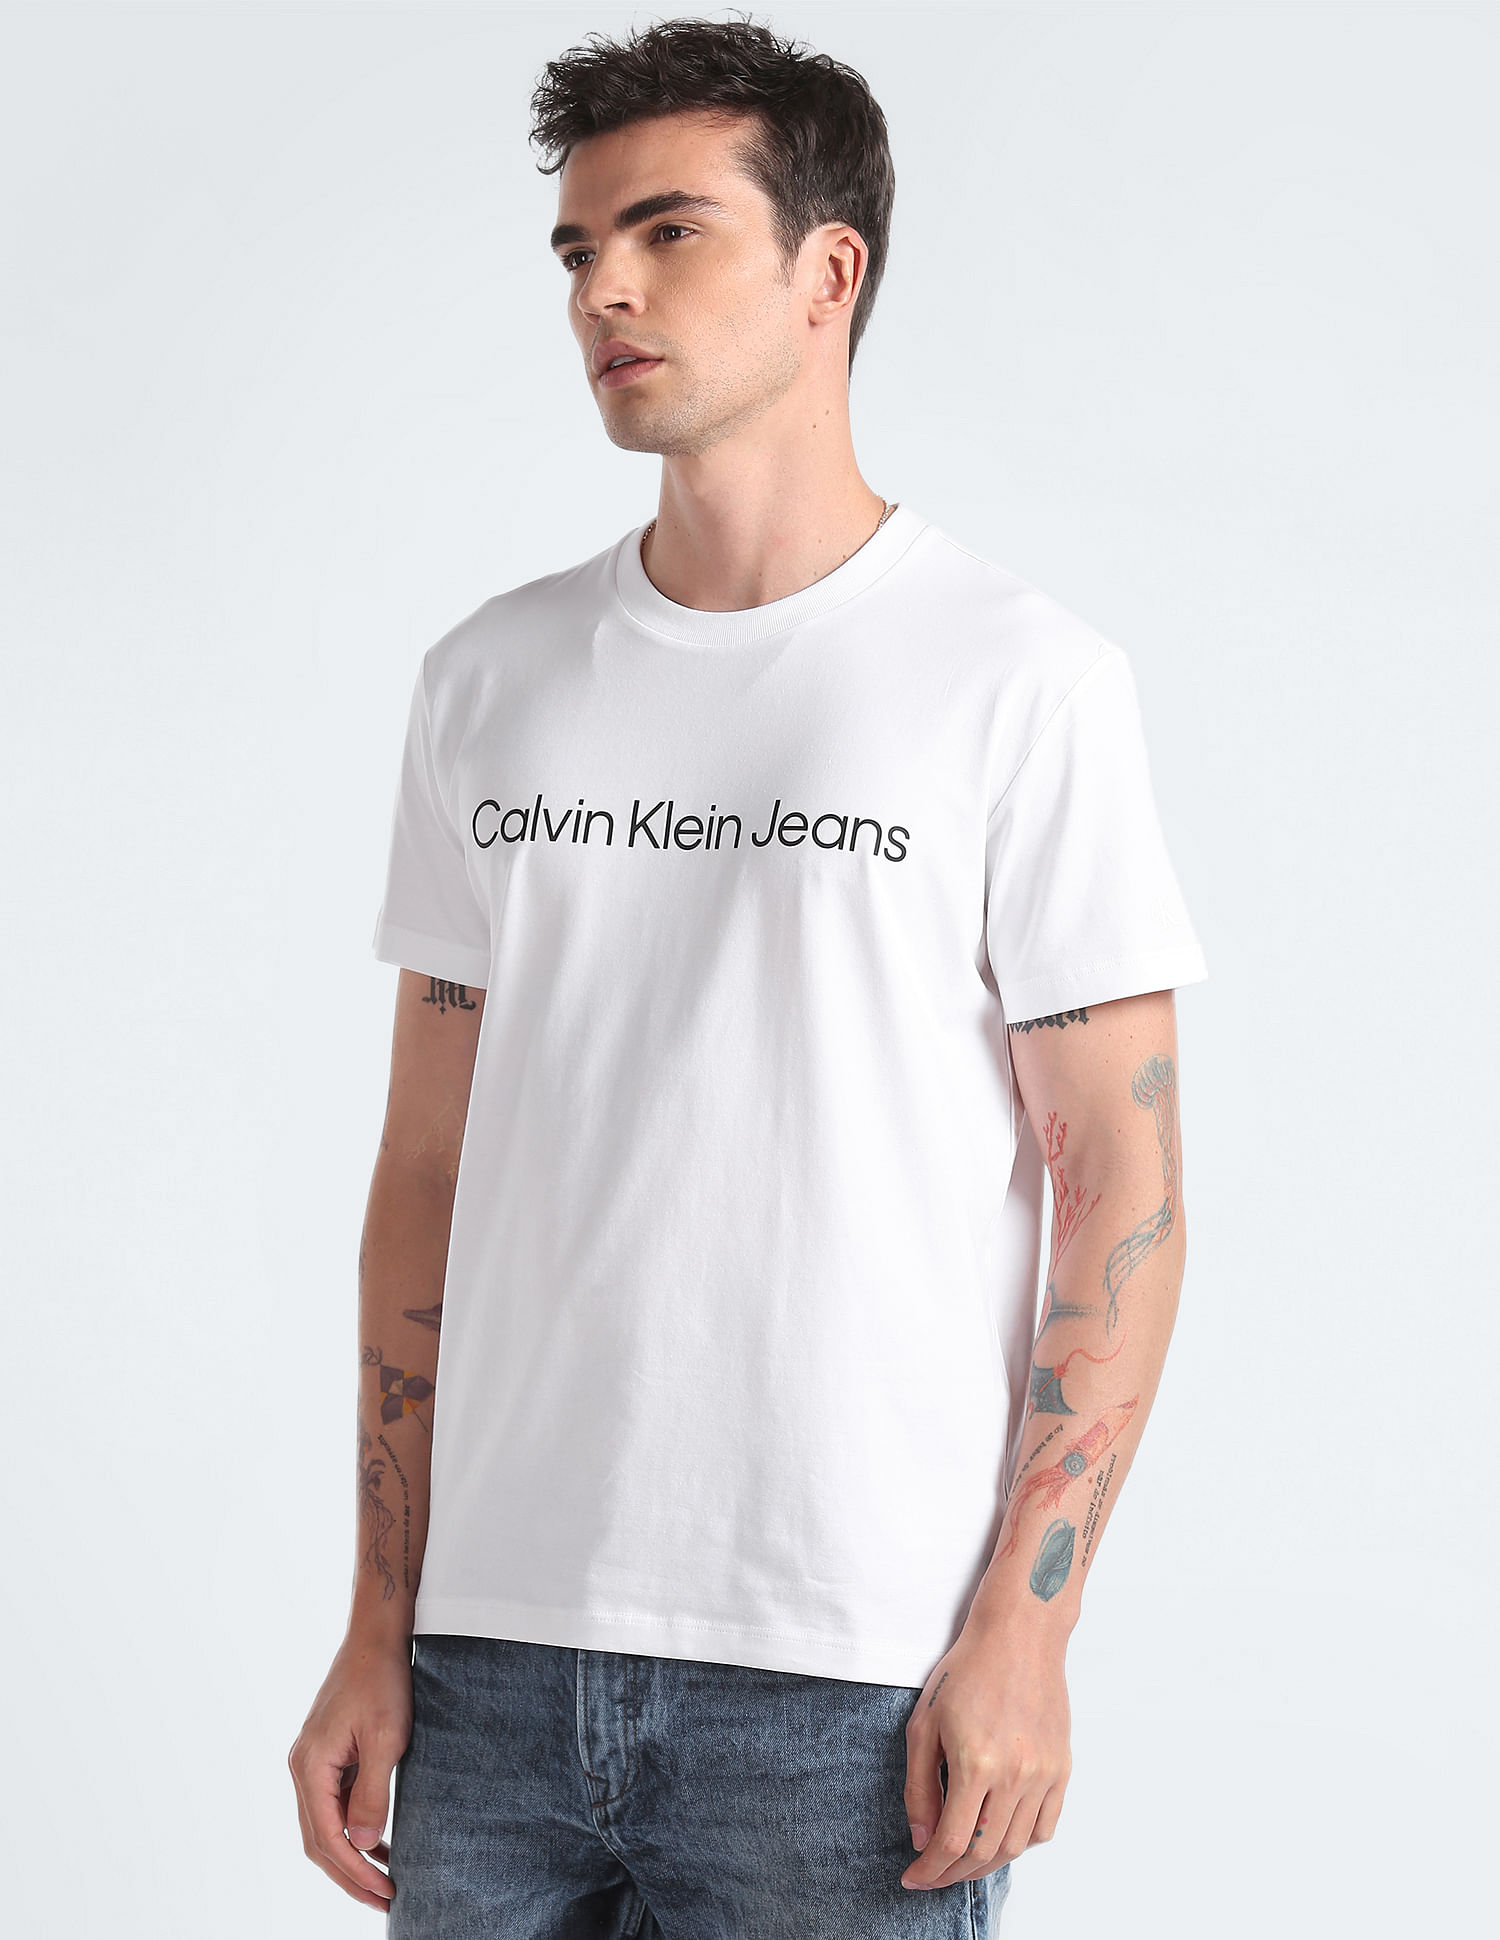 Solid Institutional T-Shirt Buy Logo Klein Jeans Calvin